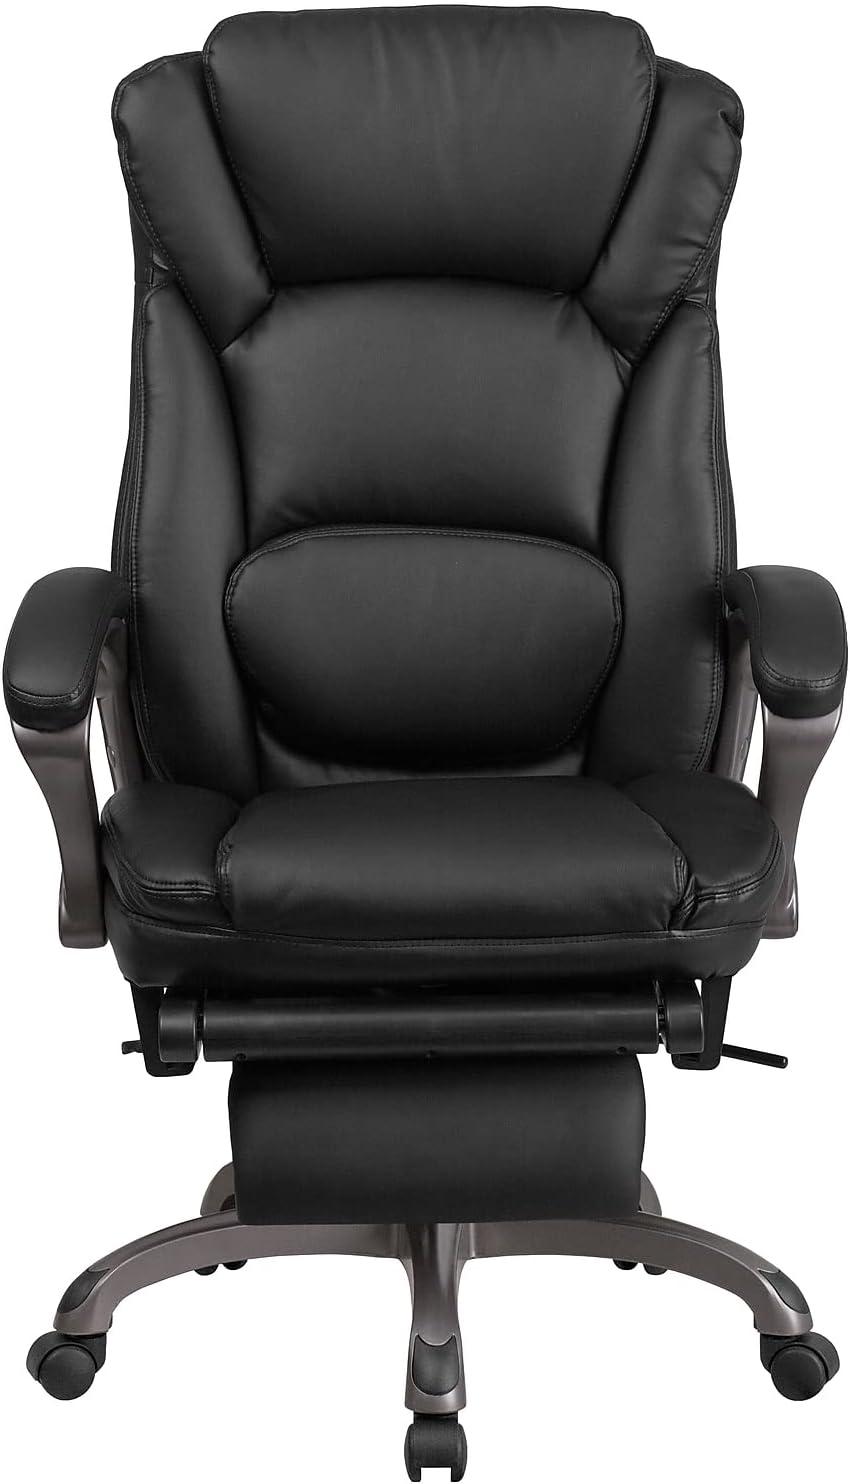 Executive High-Back Black LeatherSoft Swivel Office Chair